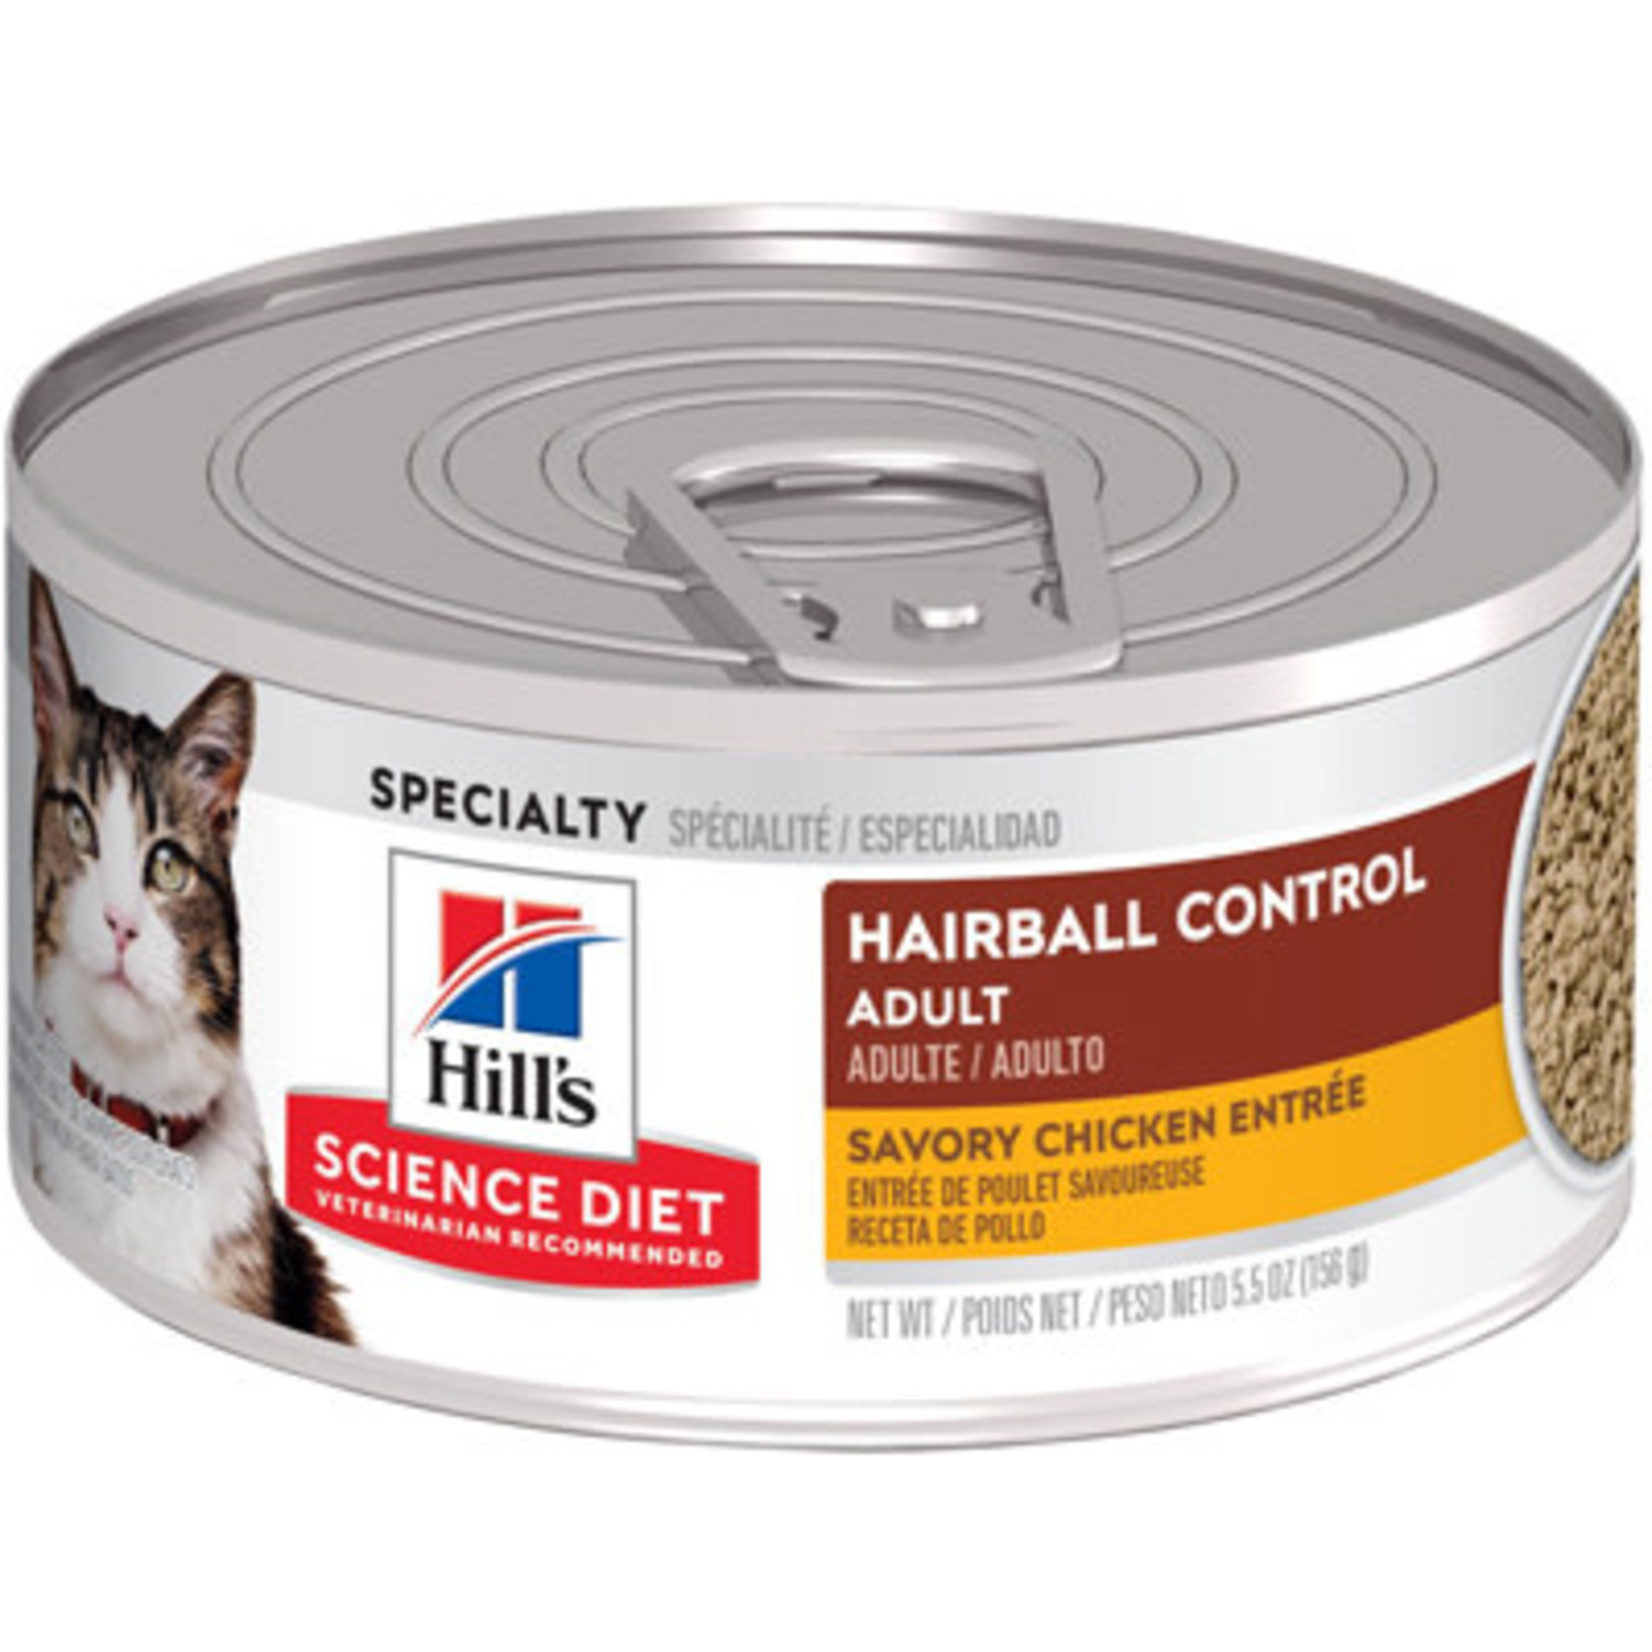 Science Diet Adult Hairball Control Savory Chicken Entree Cat 5.5oz Science Diet